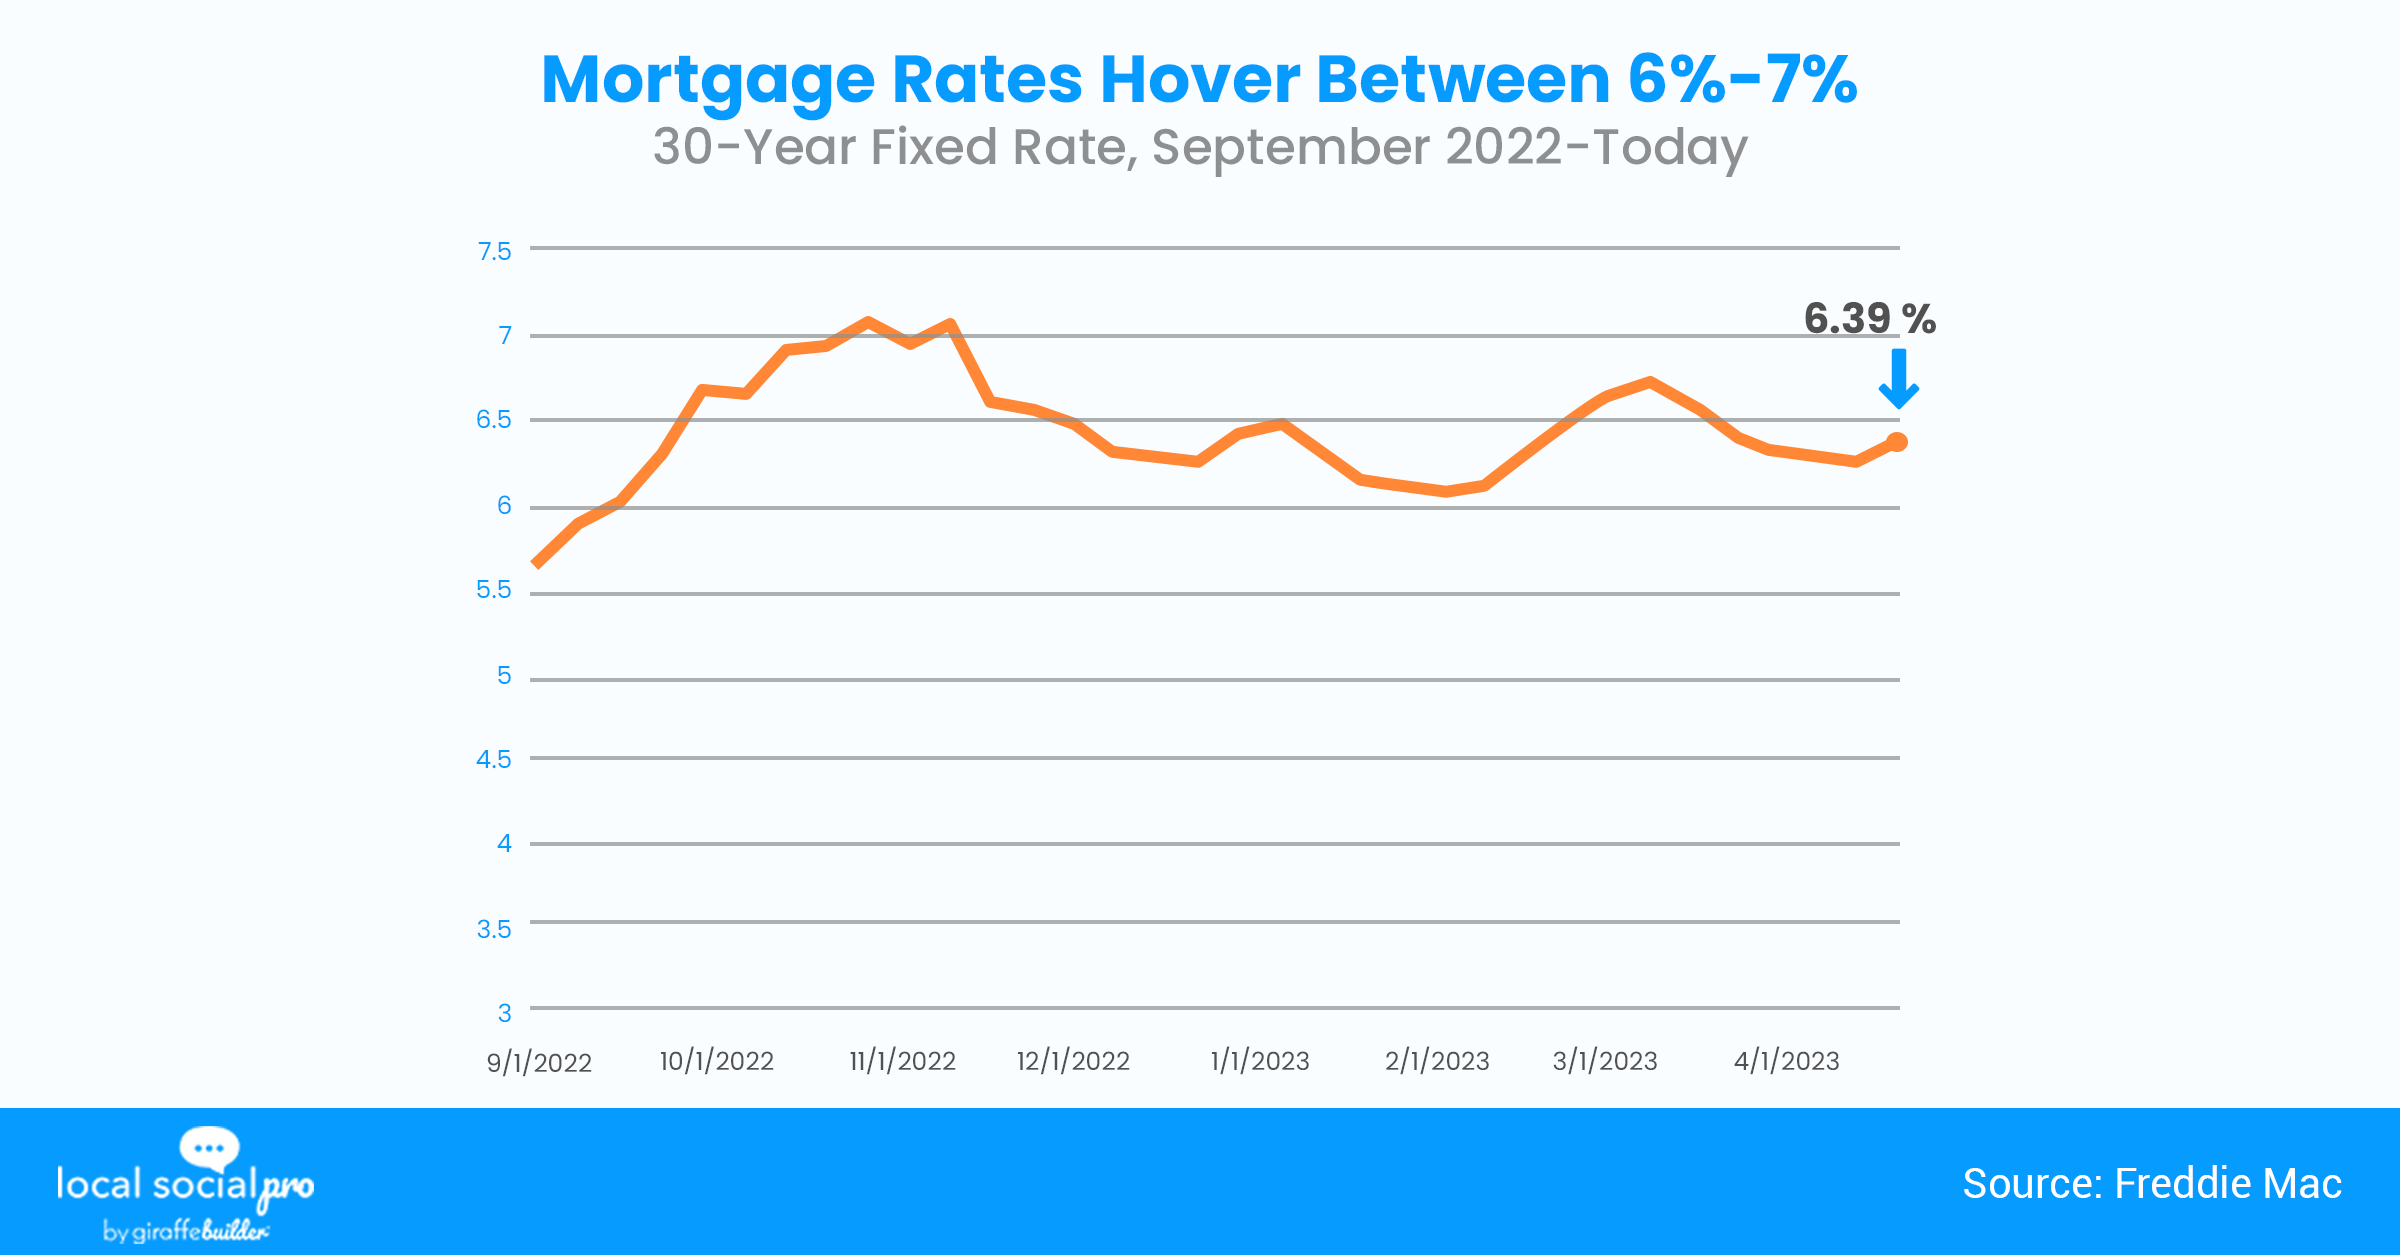 Mortgage Rates Hover Between 6% - 7%